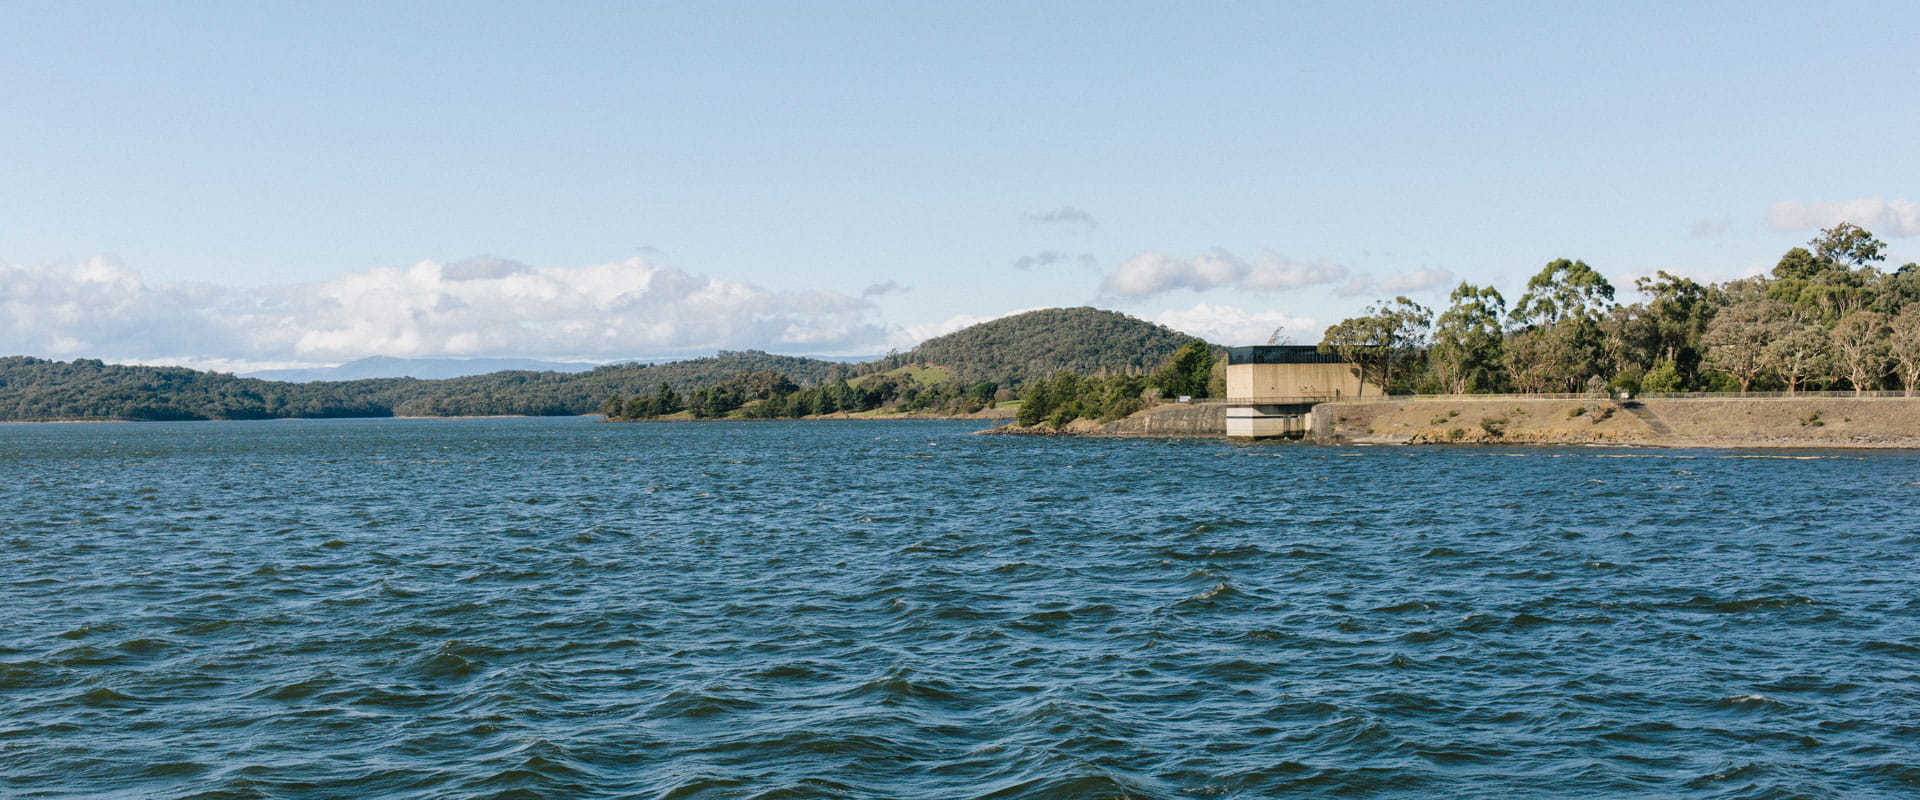 An expansive body of water. Forested hills in the background. At the edge of the lake a concrete walled structure. 